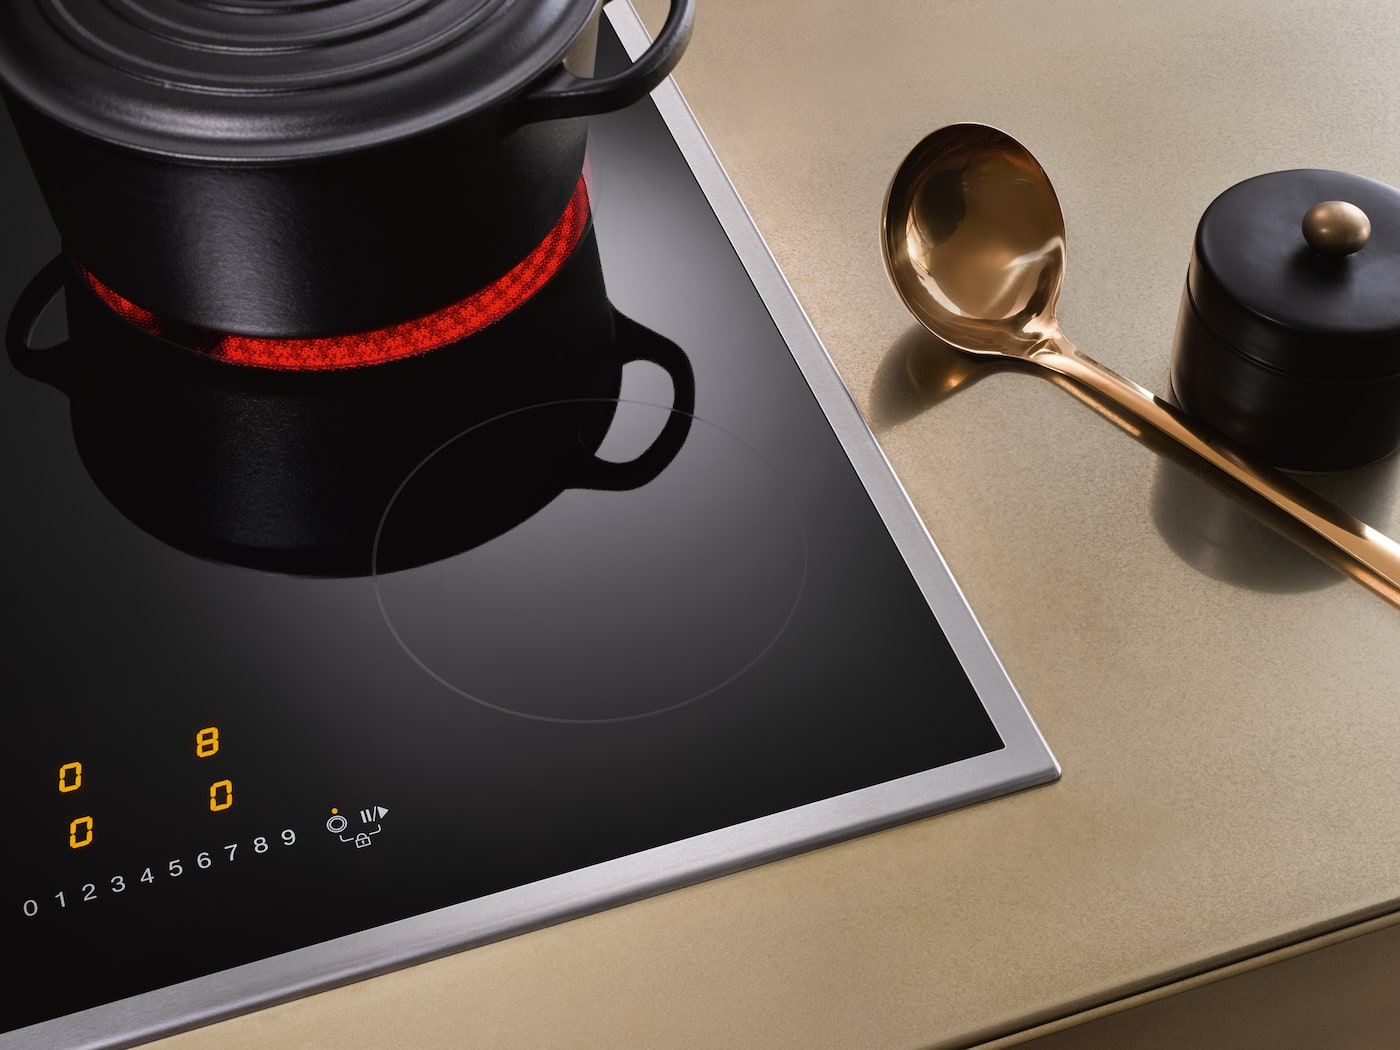 Miele KM 6520 FR Electric hob with onset controls